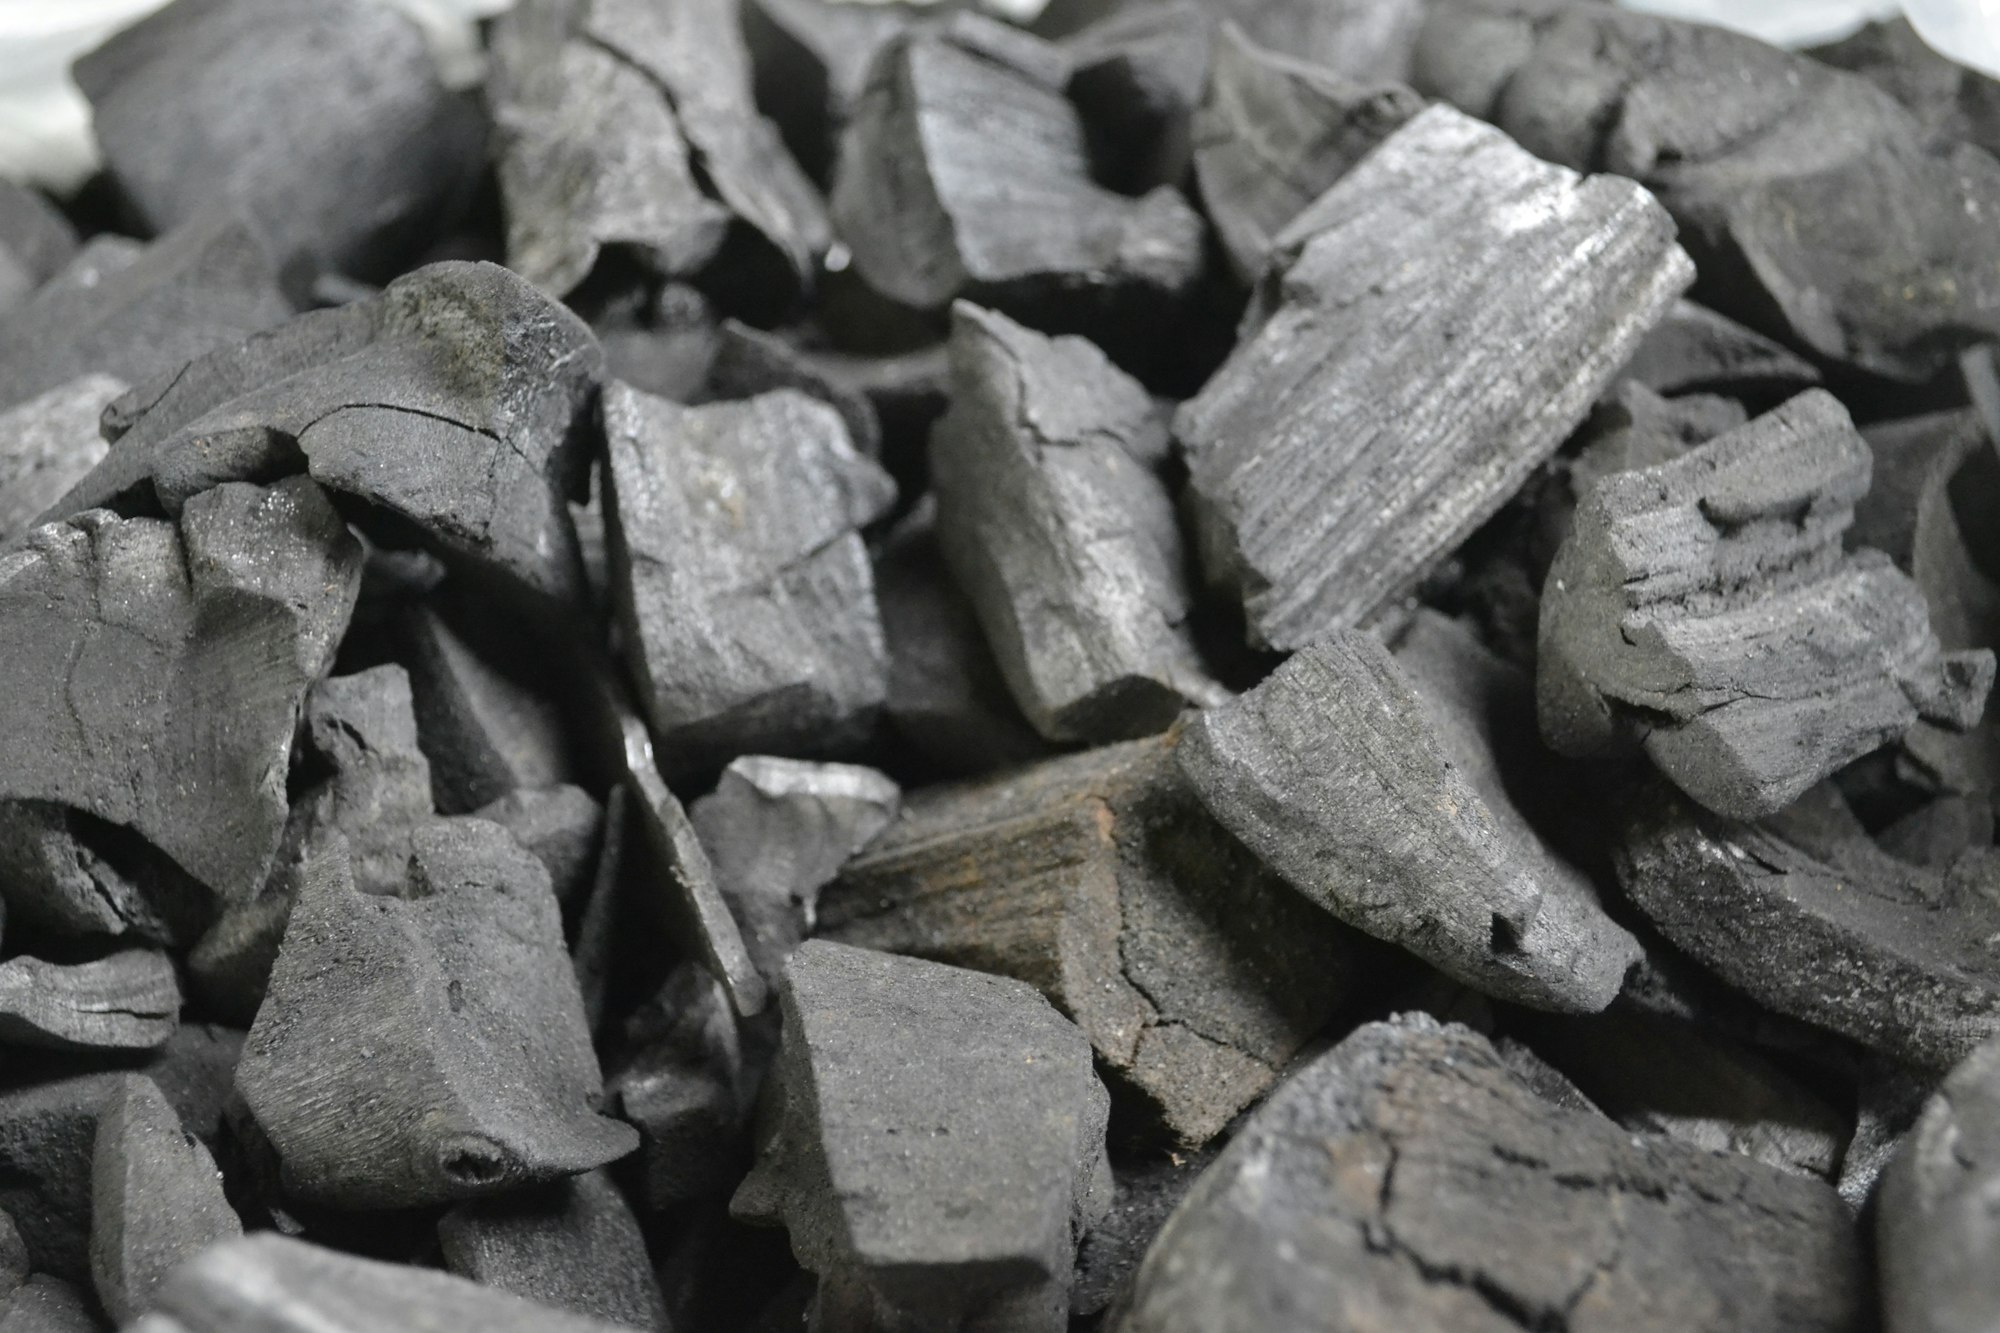 Your funding helps Biochar in California "scale to meet the moment"